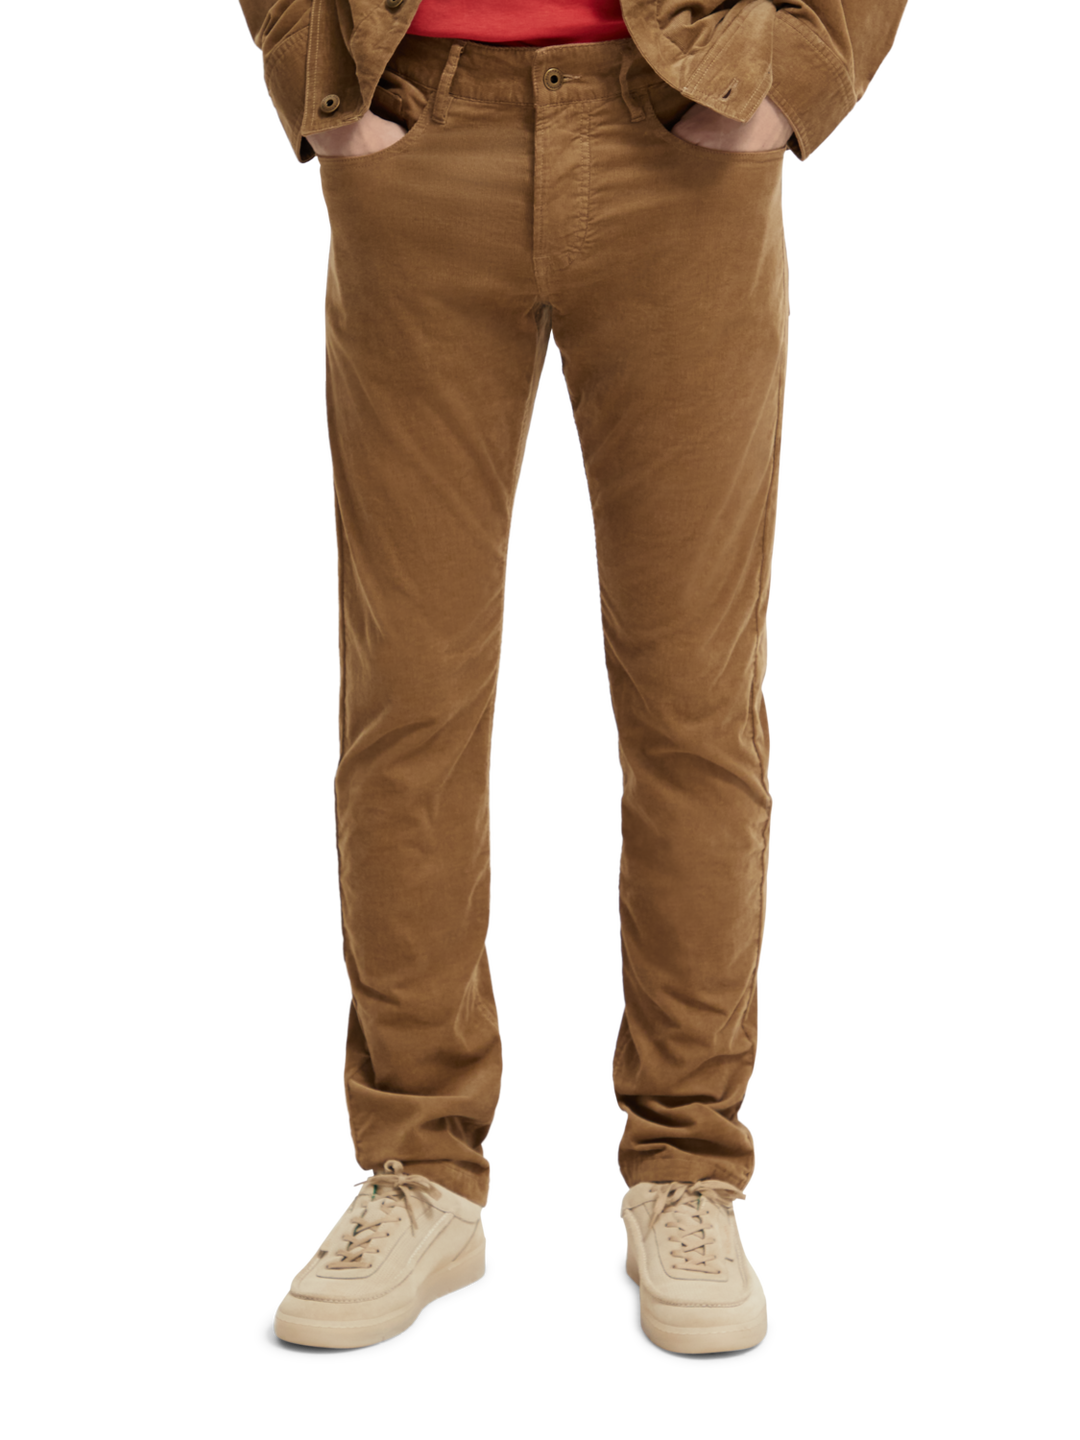 Ralston 5 Pocket Fine Corduroy Pant in Taupe | Buster McGee